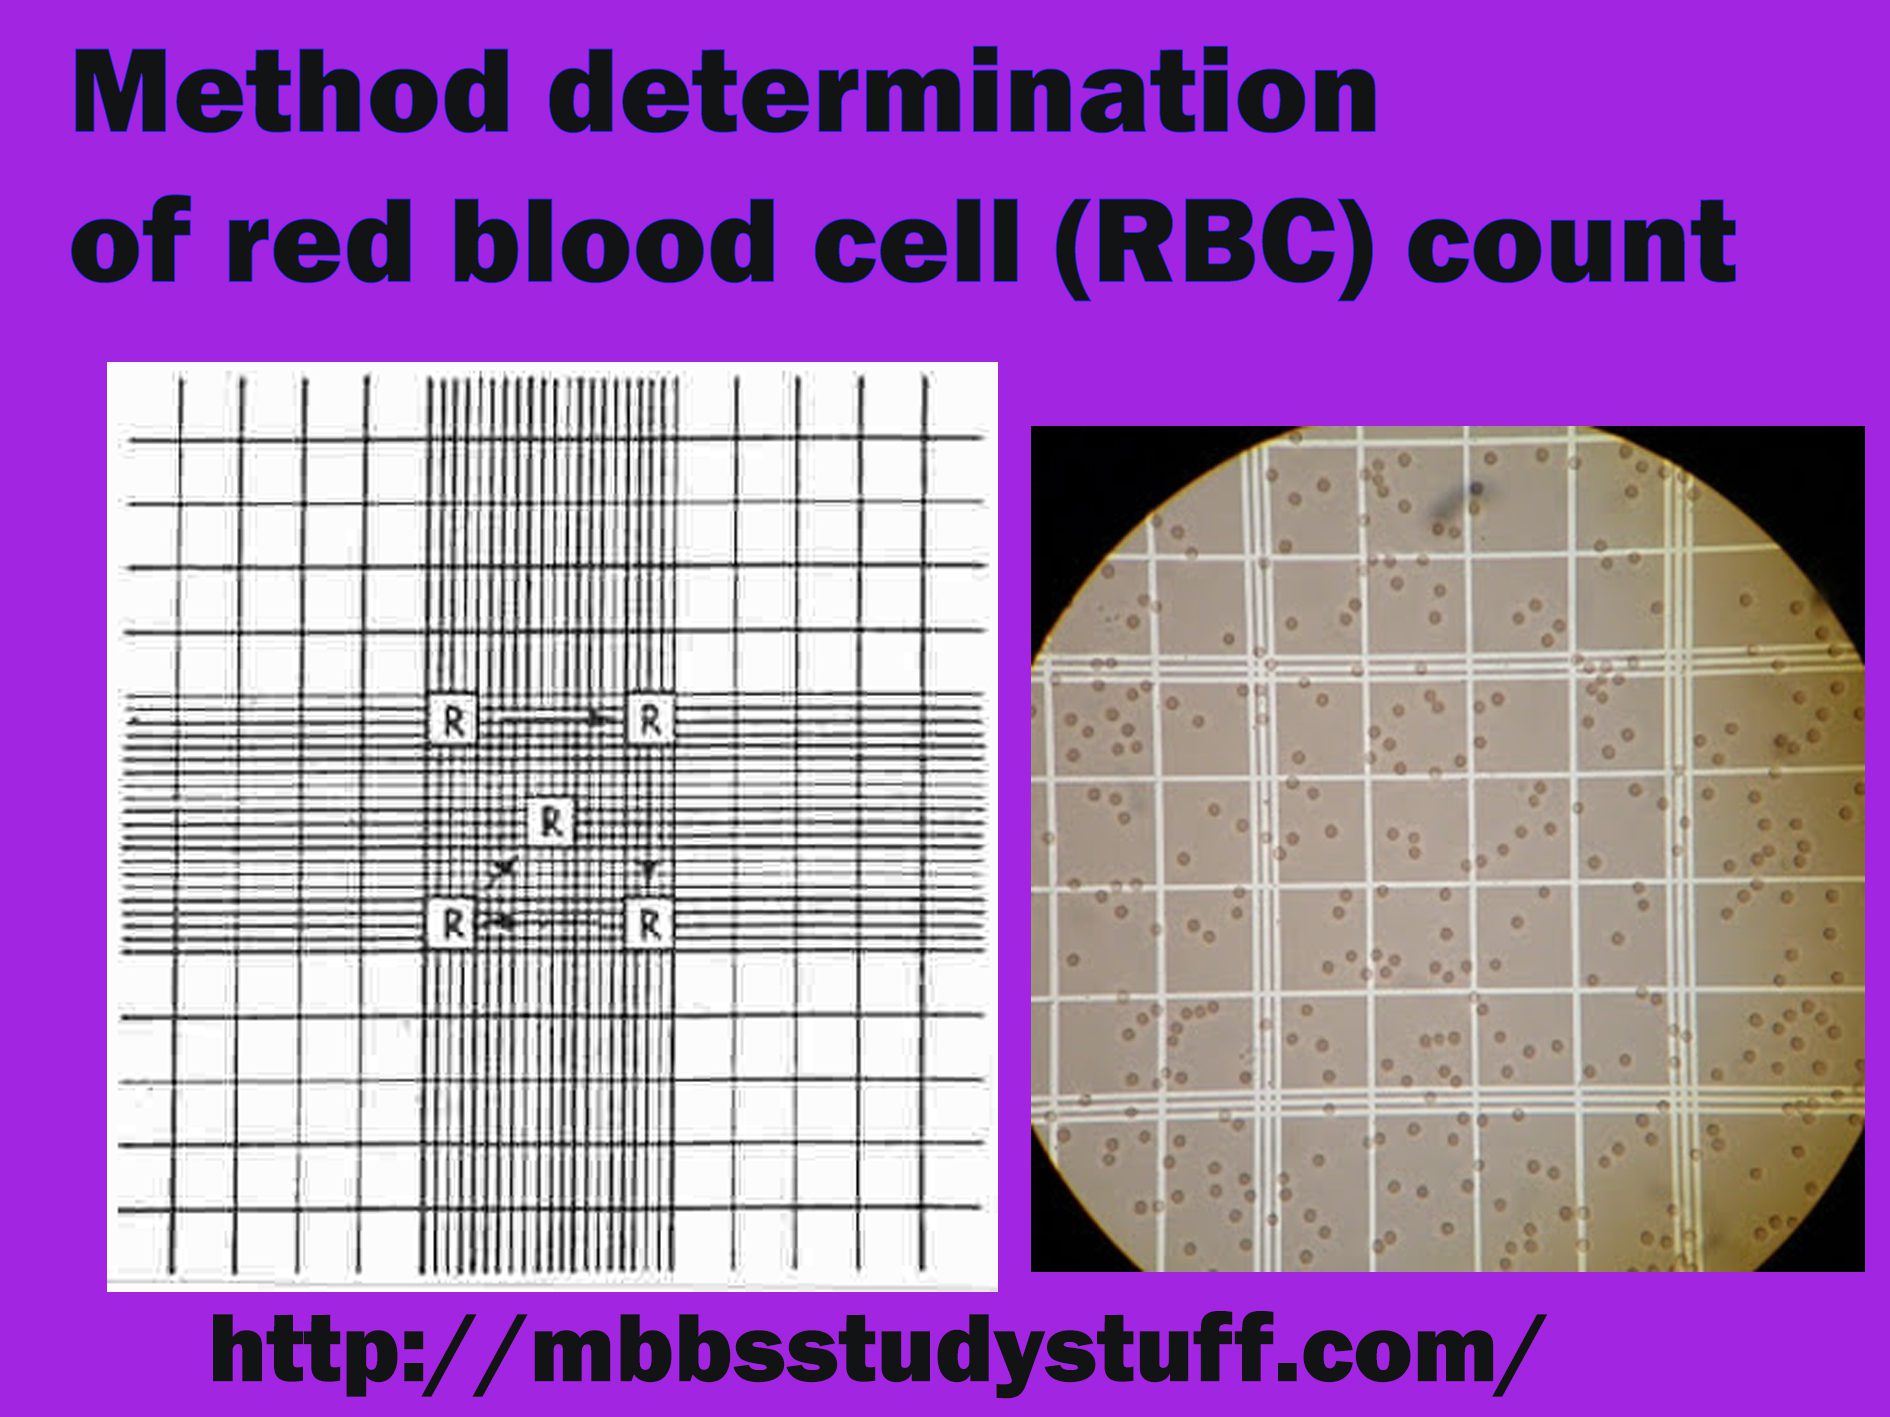 Method determination of red blood cell (RBC) count